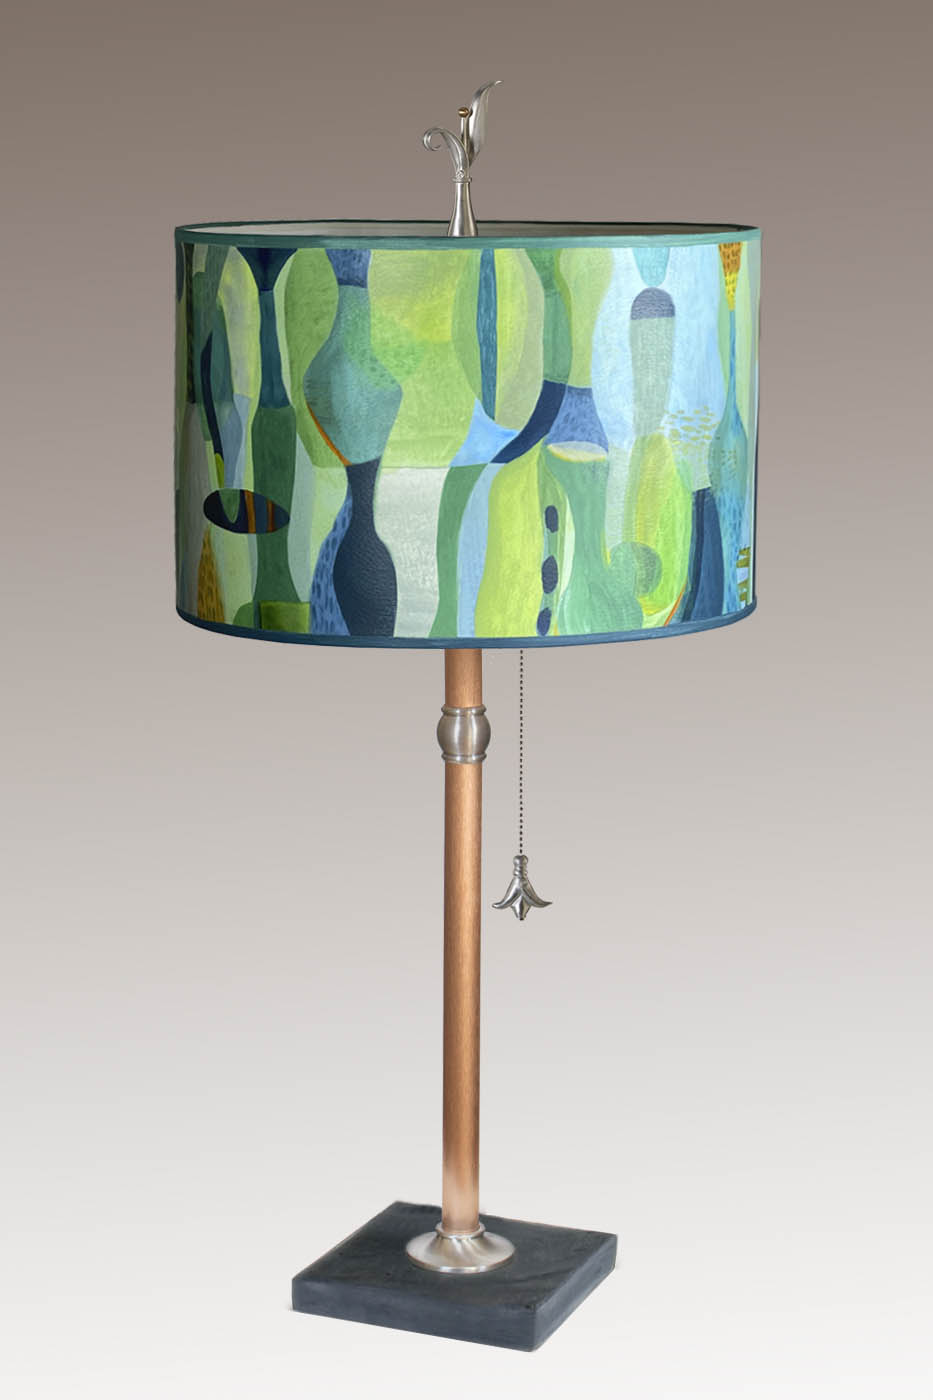 Janna Ugone & Co Table Lamp Copper Table Lamp with Large Drum Shade in Riviera in Citrus